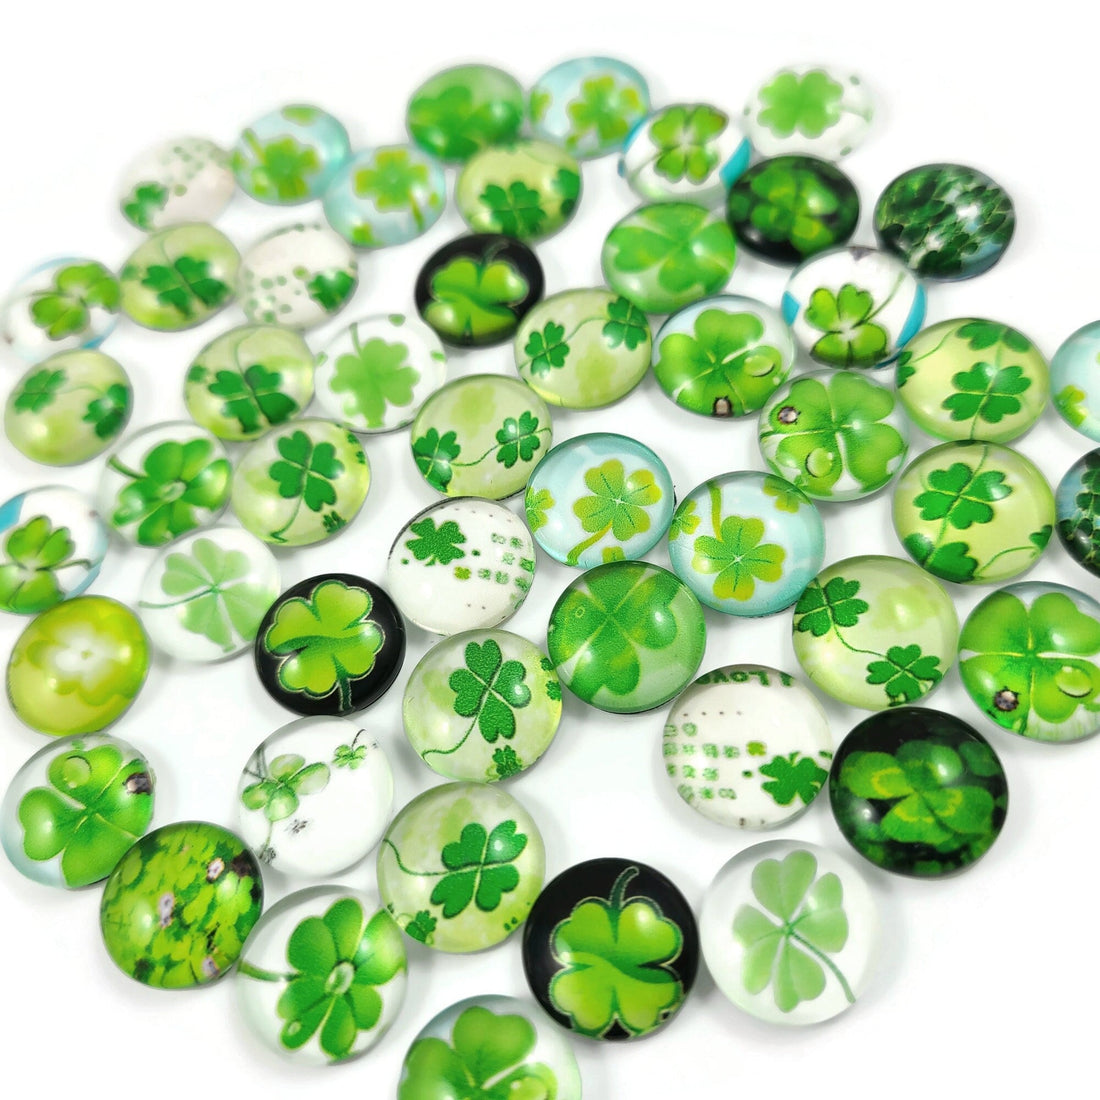 Four leaf clover glass cabochons, 12mm flat round domed cabochons, Set of 50 mixed, Jewelry making